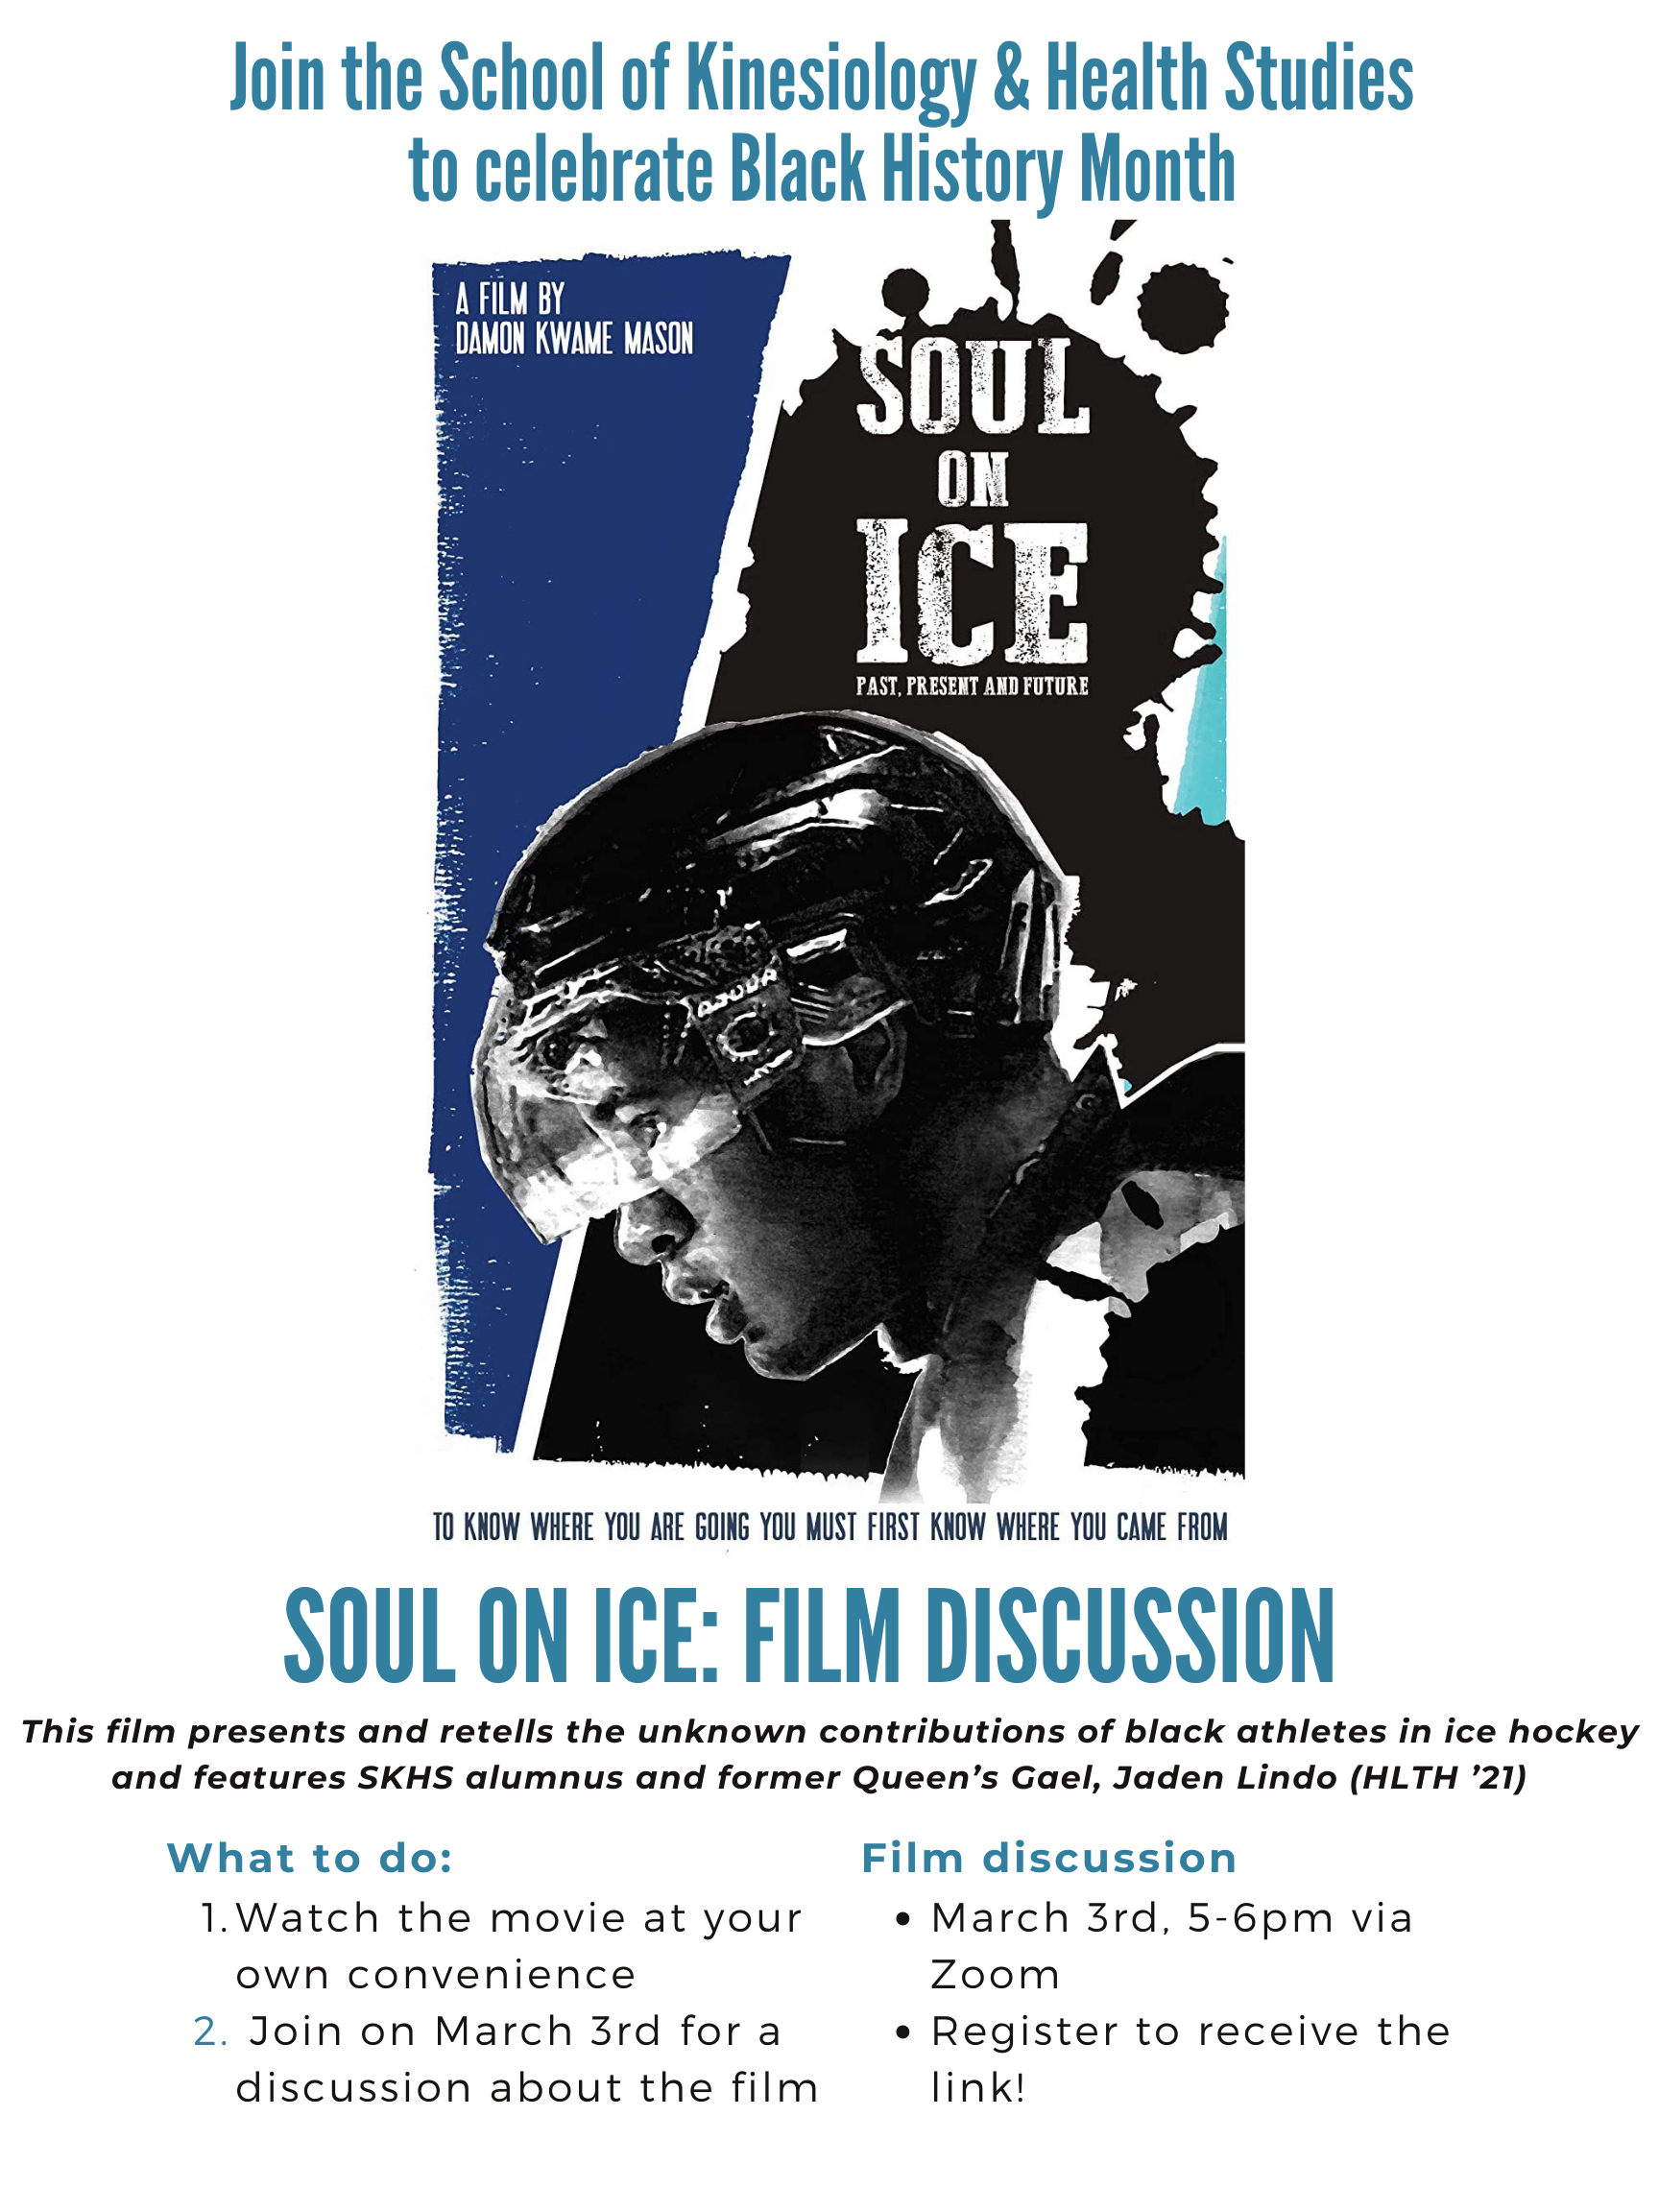 Soul on Ice Film Discussion Flyer